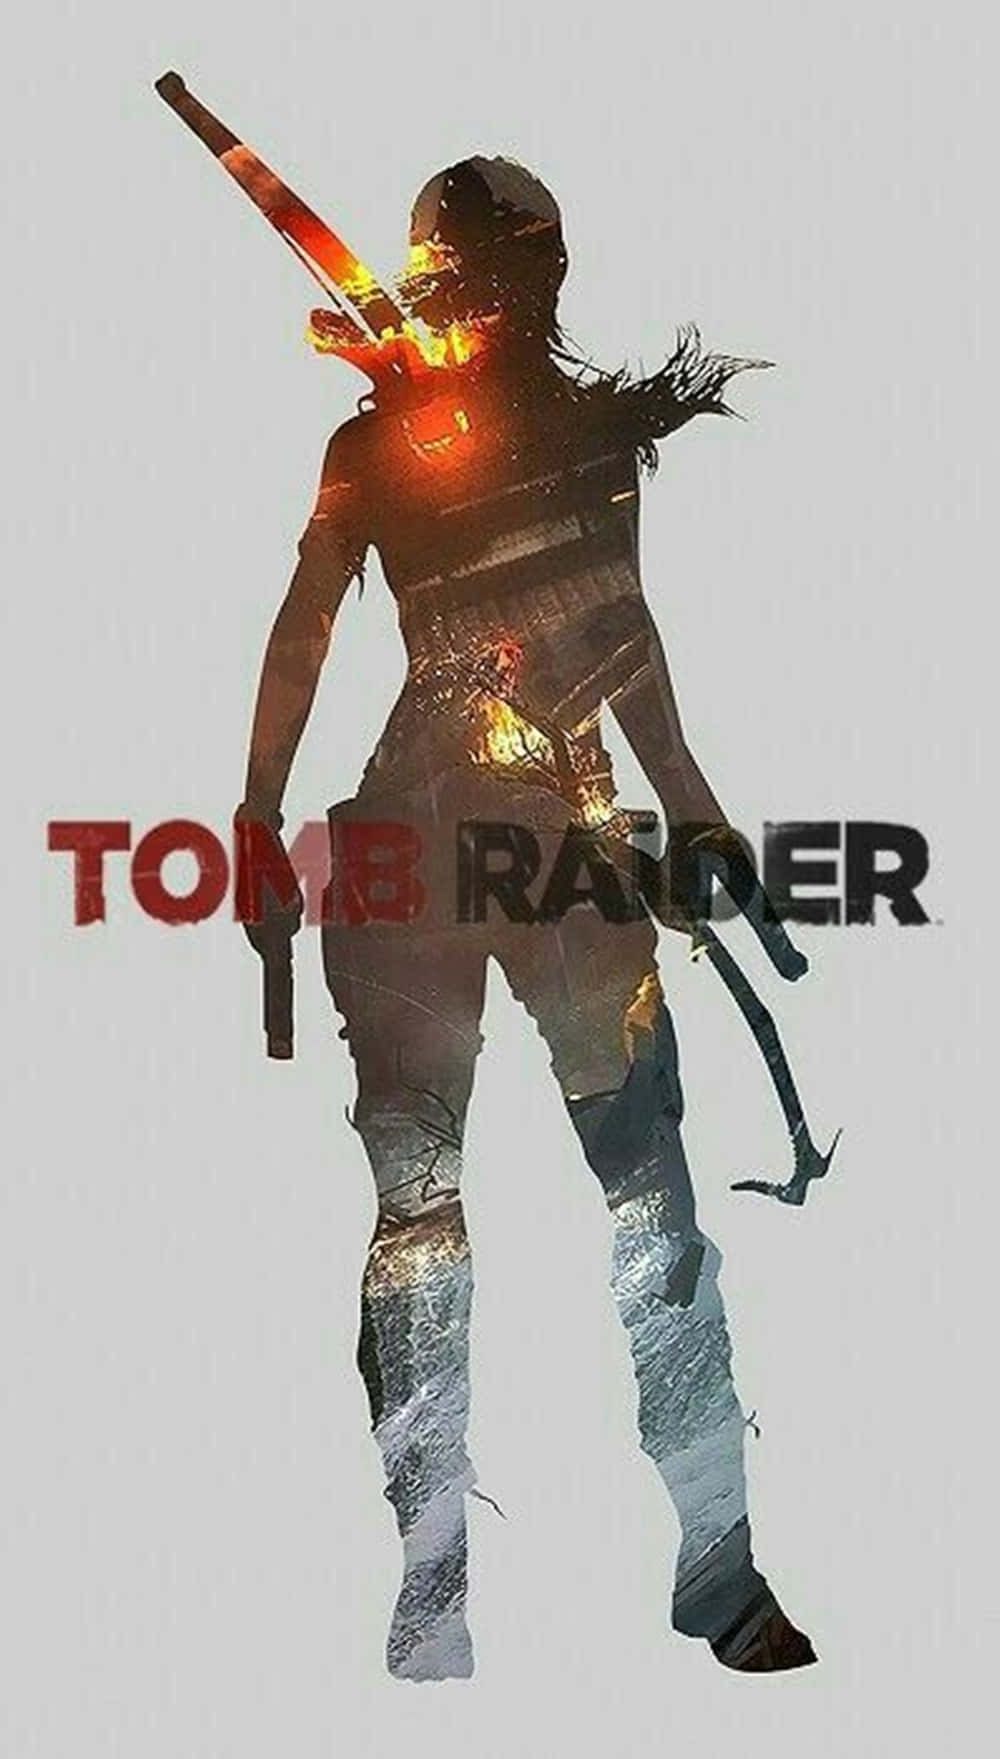 "It's Lara Croft in your pocket! Get the latest Tomb Raider Phone for a great gaming experience." Wallpaper